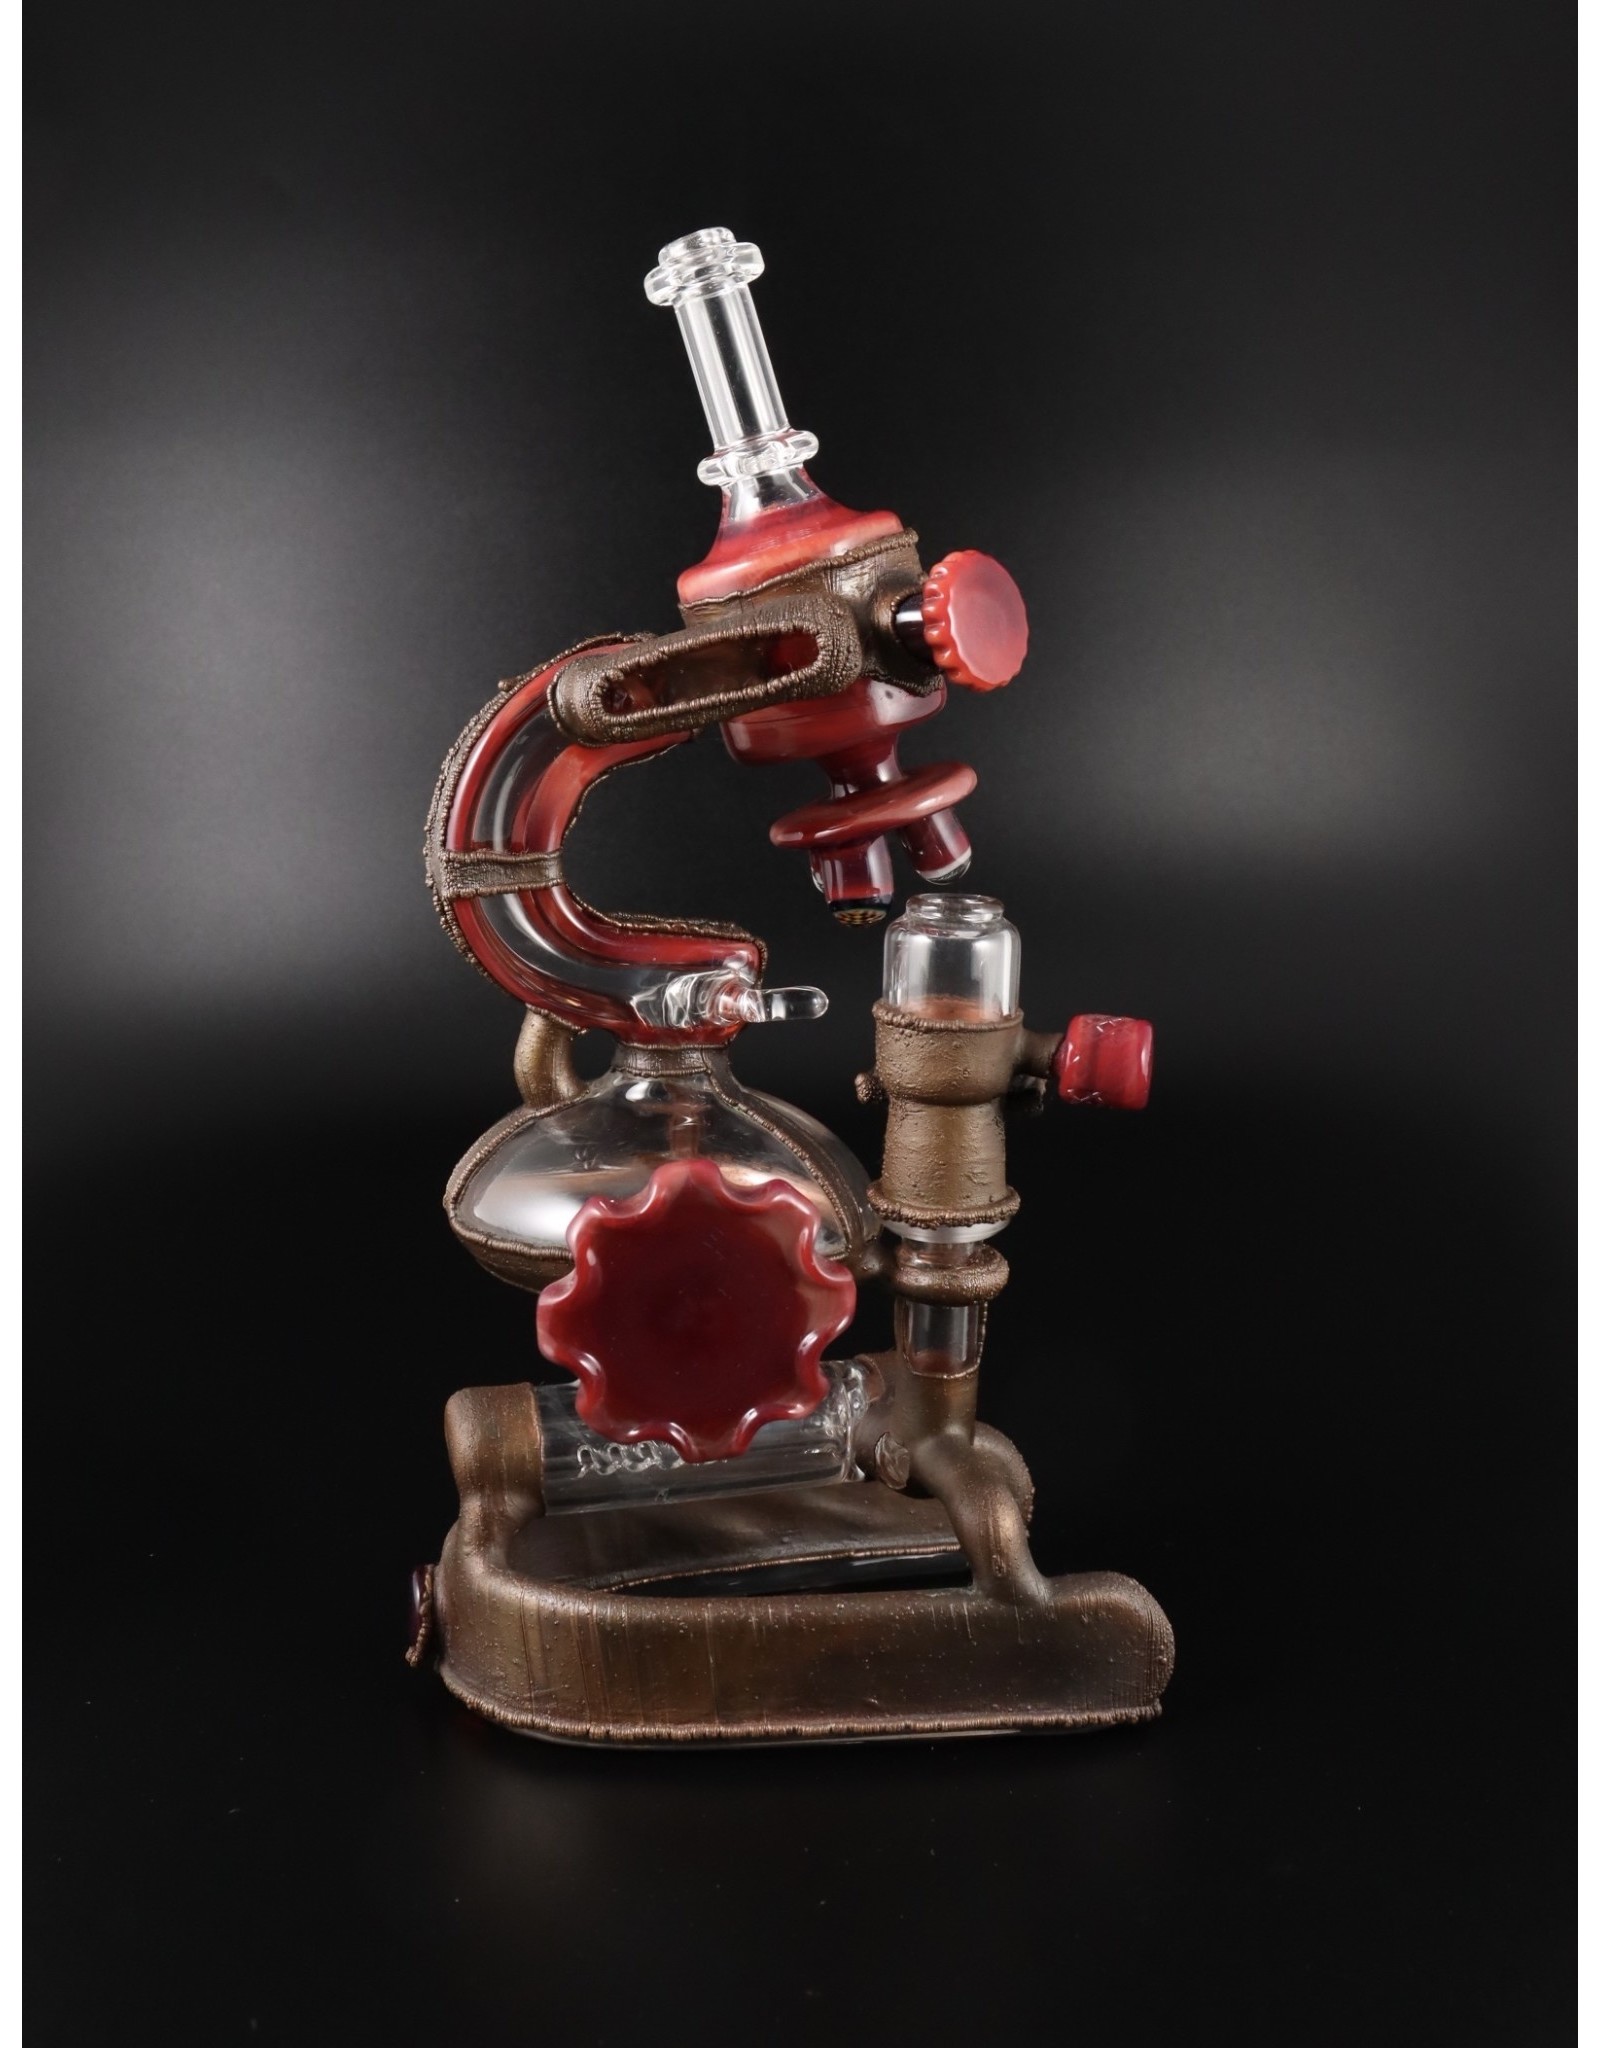 Eric Anders / Troy Bennett Glass (TAB) Electroformed Microscope Water Pipe